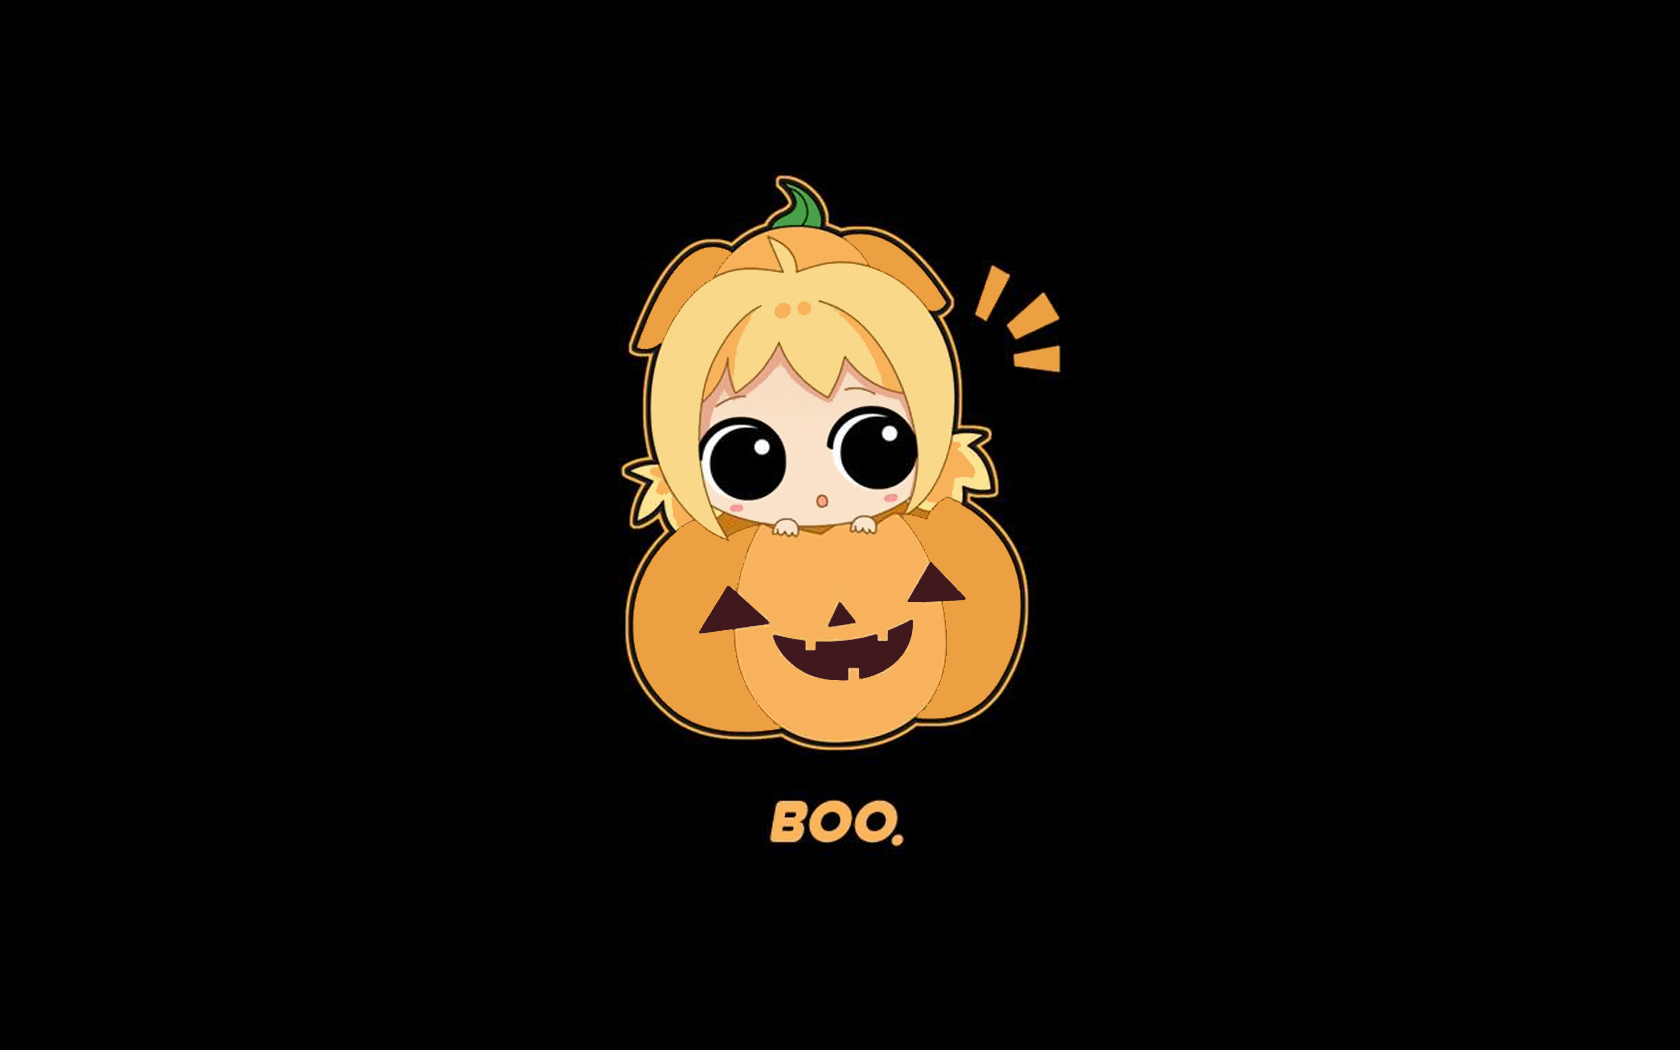 Free download Download Cute Halloween Wallpaper 15759 1680x1050 px High [1680x1050] for your Desktop, Mobile & Tablet. Explore Funny Stuff Wallpaper. Funny Stuff Wallpaper, Stuff Wallpaper, Cool Stuff Wallpaper